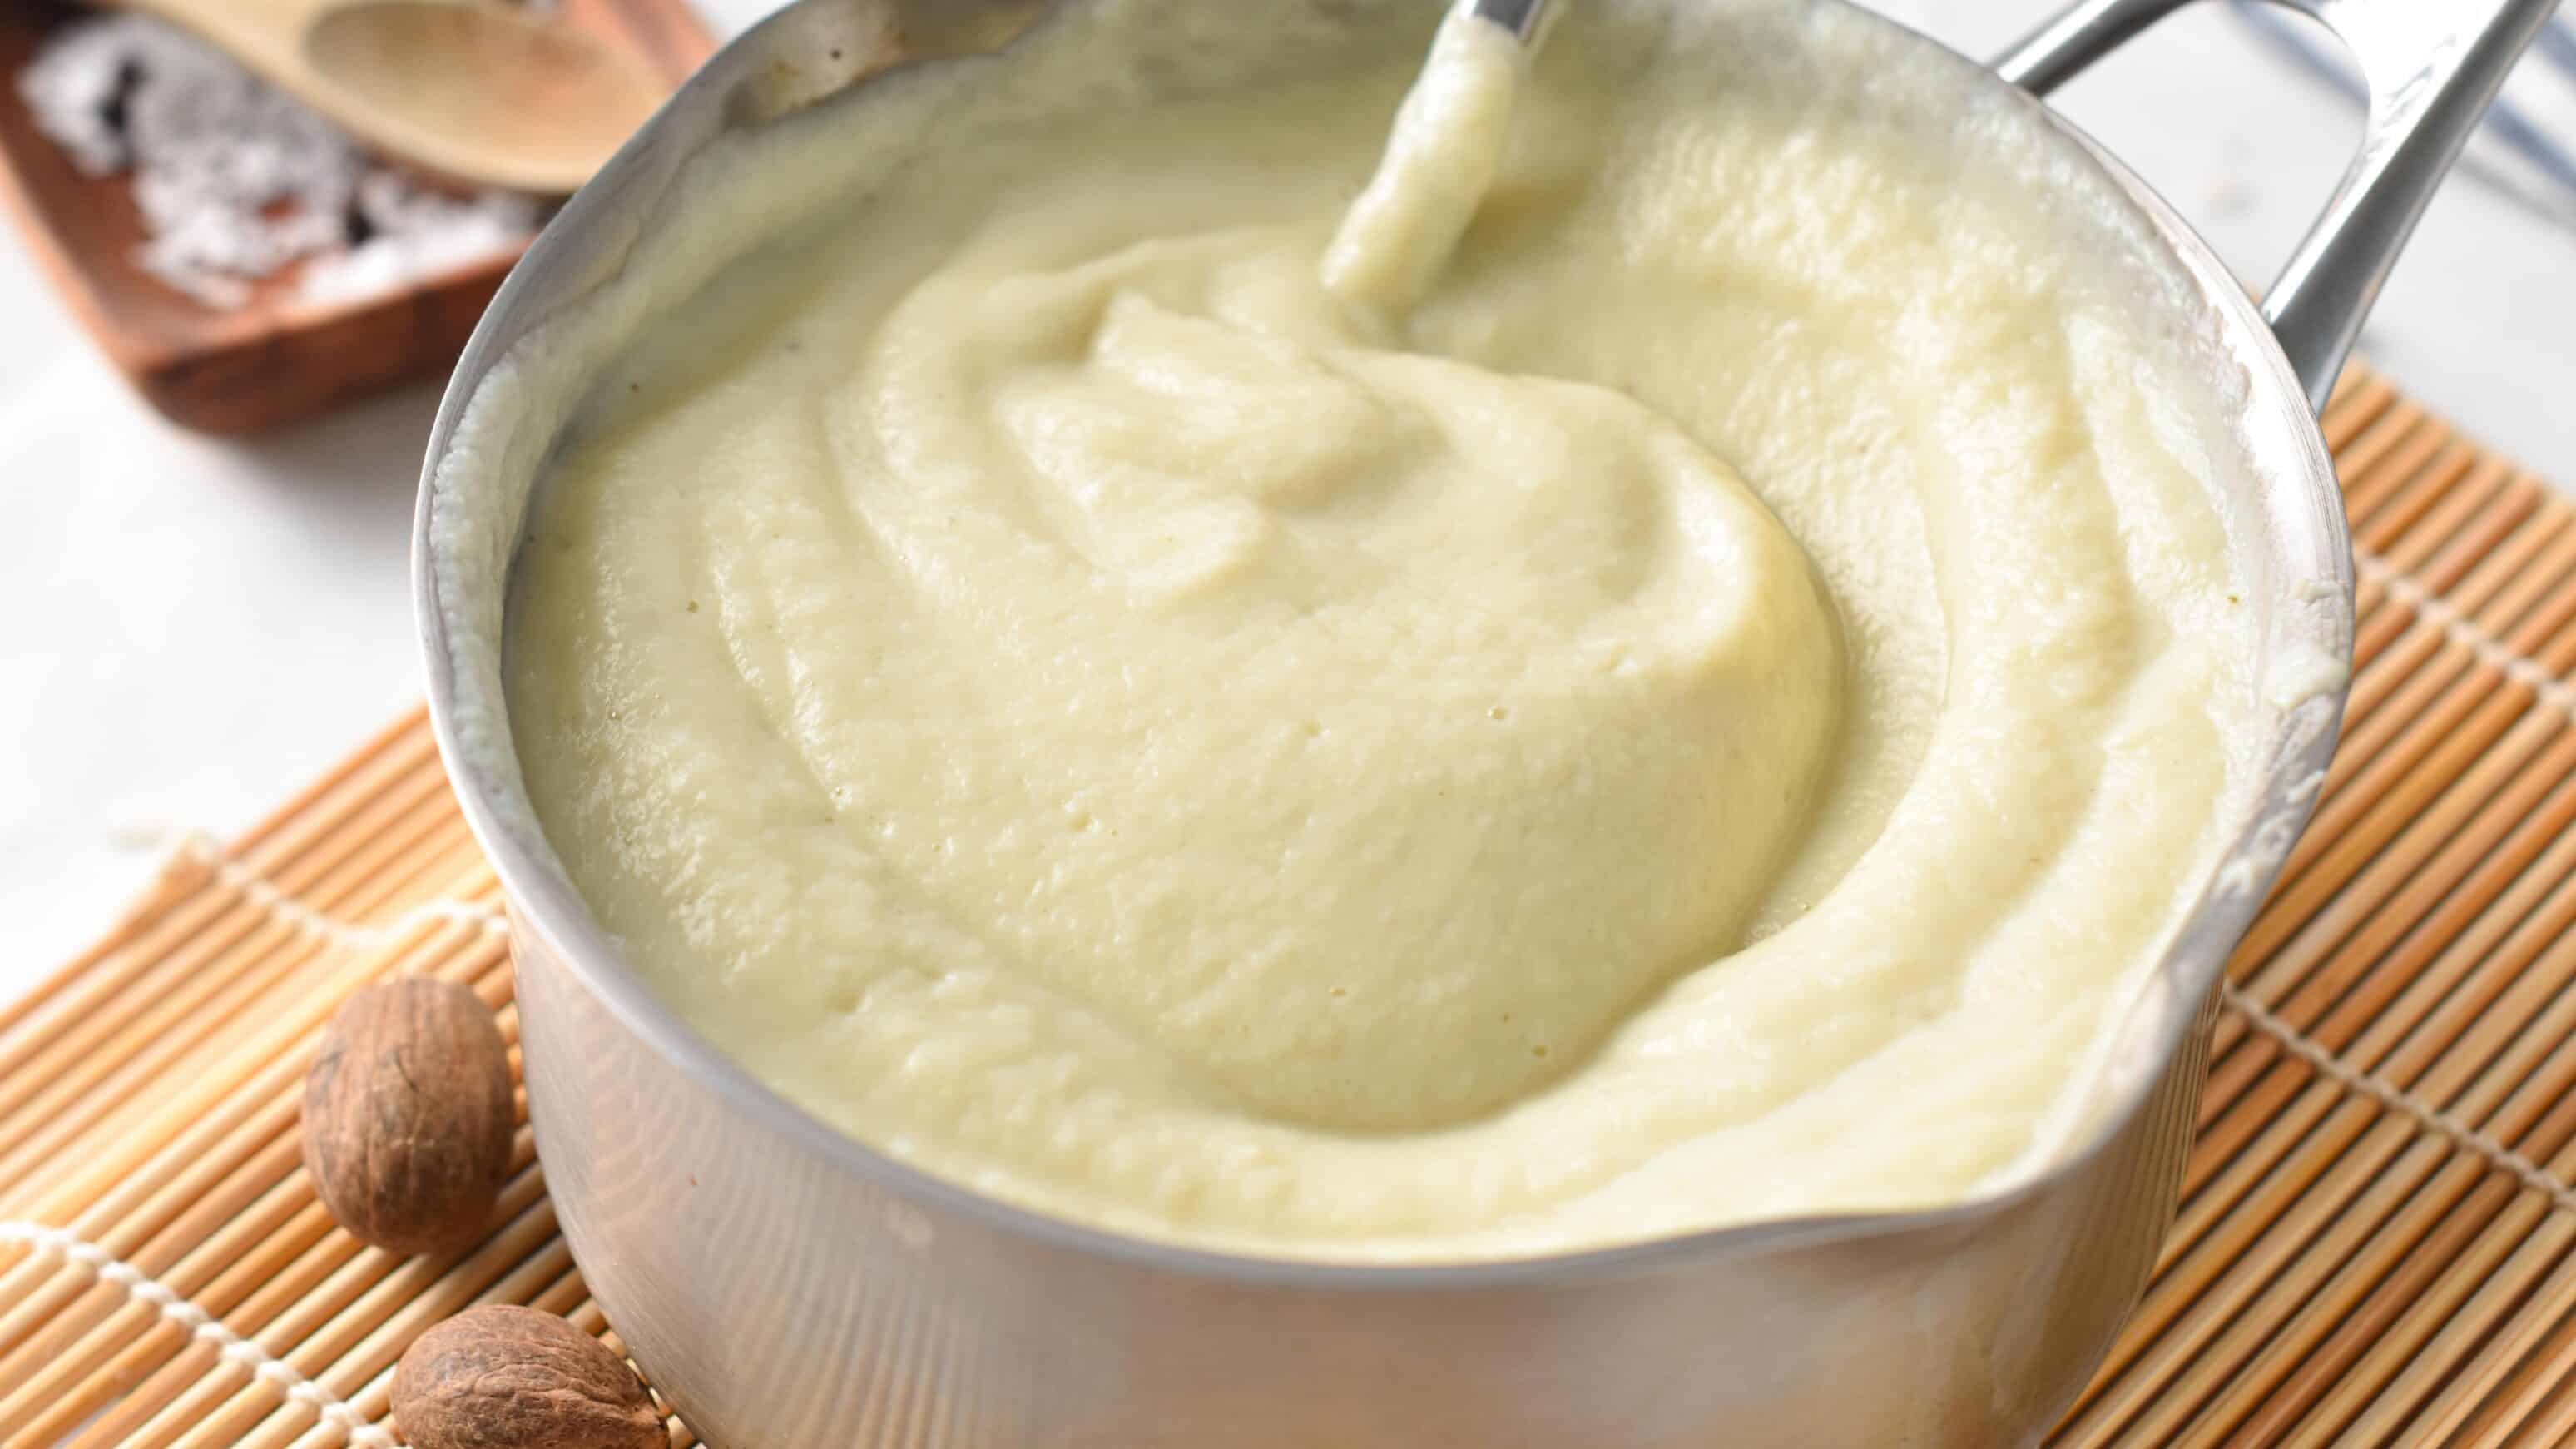 This cauliflower bechamel sauce is such a creamy, healthy bechamel for any pasta bake, casserole, or gratin. Plus, it's also dairy-free and gluten-free made without flour or butter.